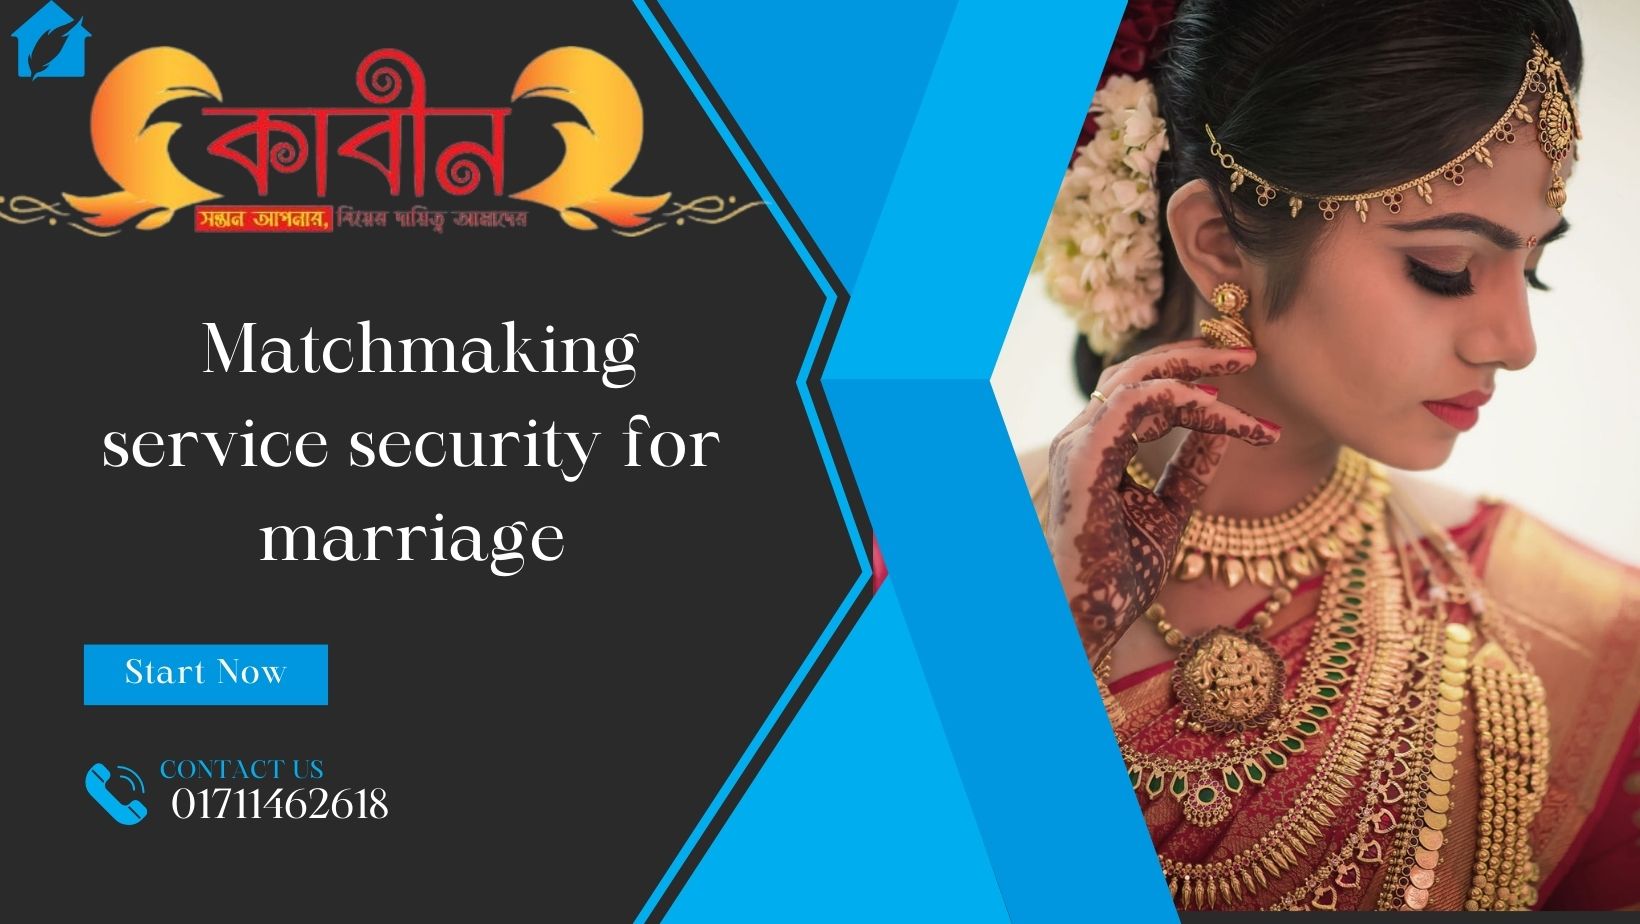  Matchmaking service security for marriage